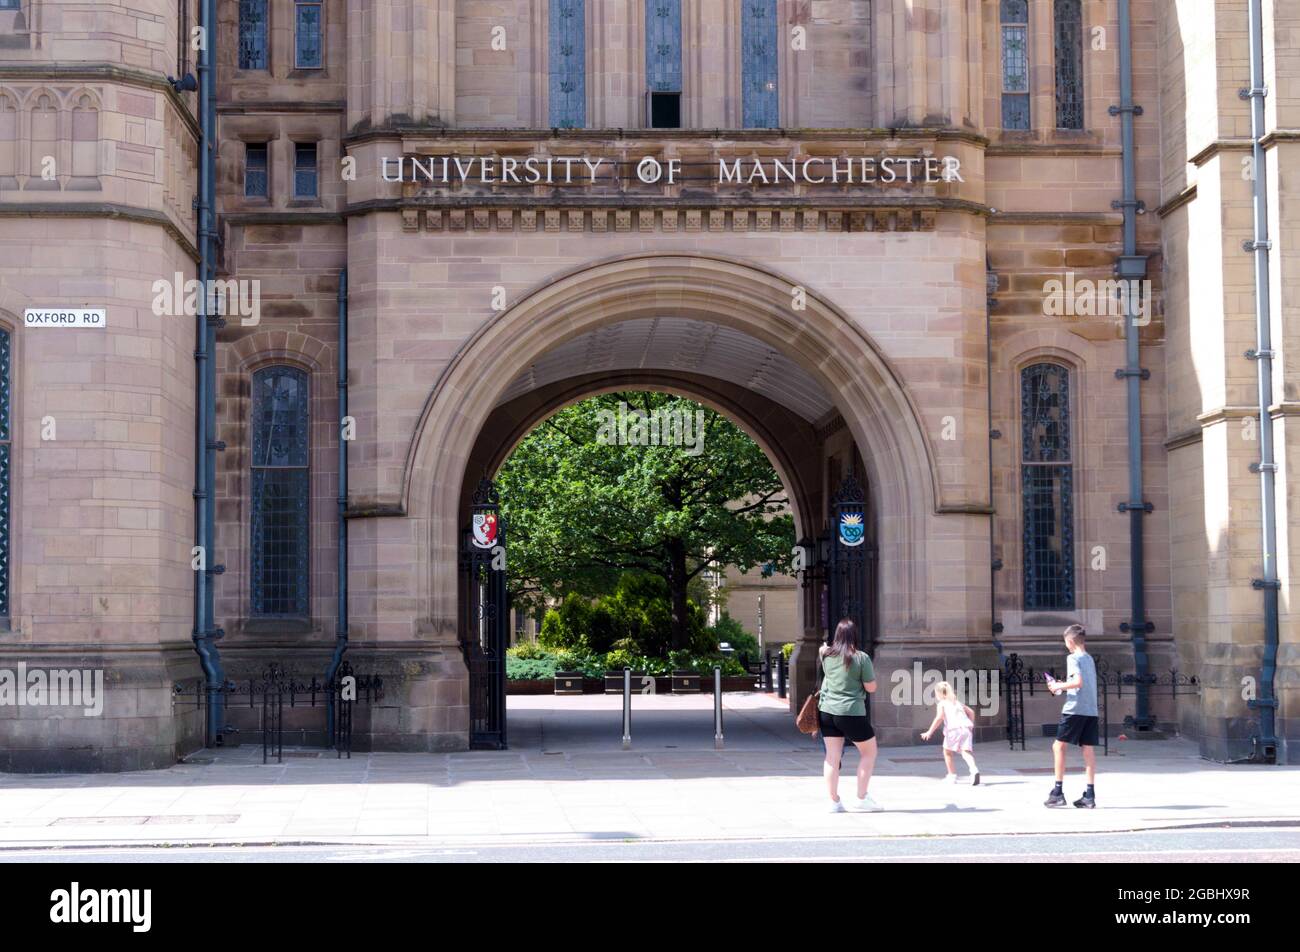 Woman and children look at Whitworth Hall with a sign for the University of Manchester, Manchester, England, United Kingdom. Stock Photo